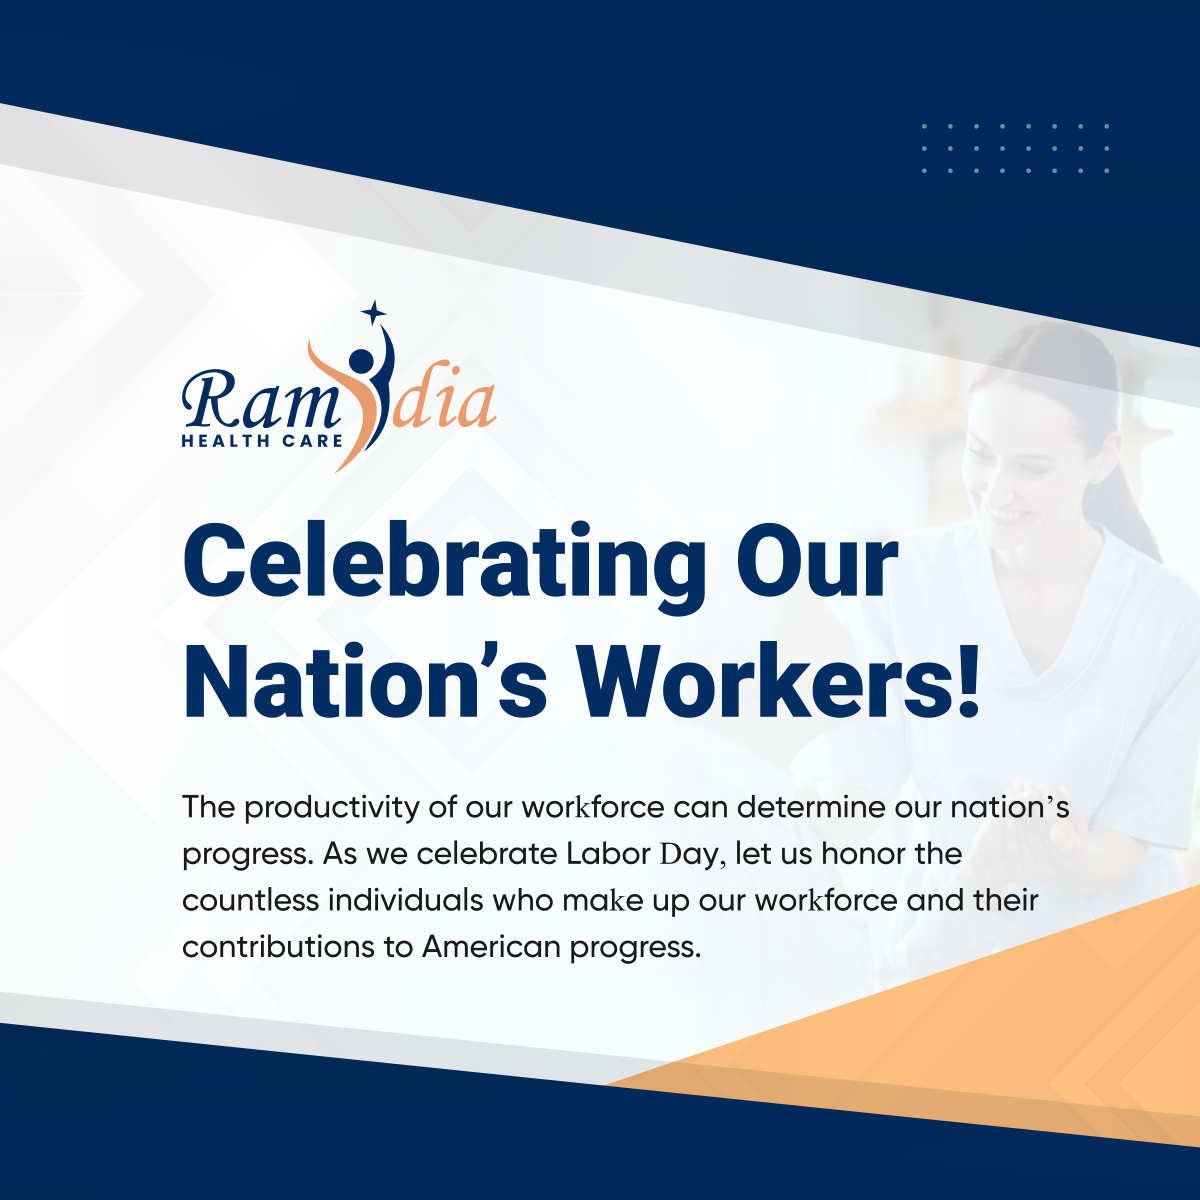 Celebrating Our Nation’s Workers! 

#PerthAmboyNJ #NationsWorkers #LaborDay #HomeHealthCare